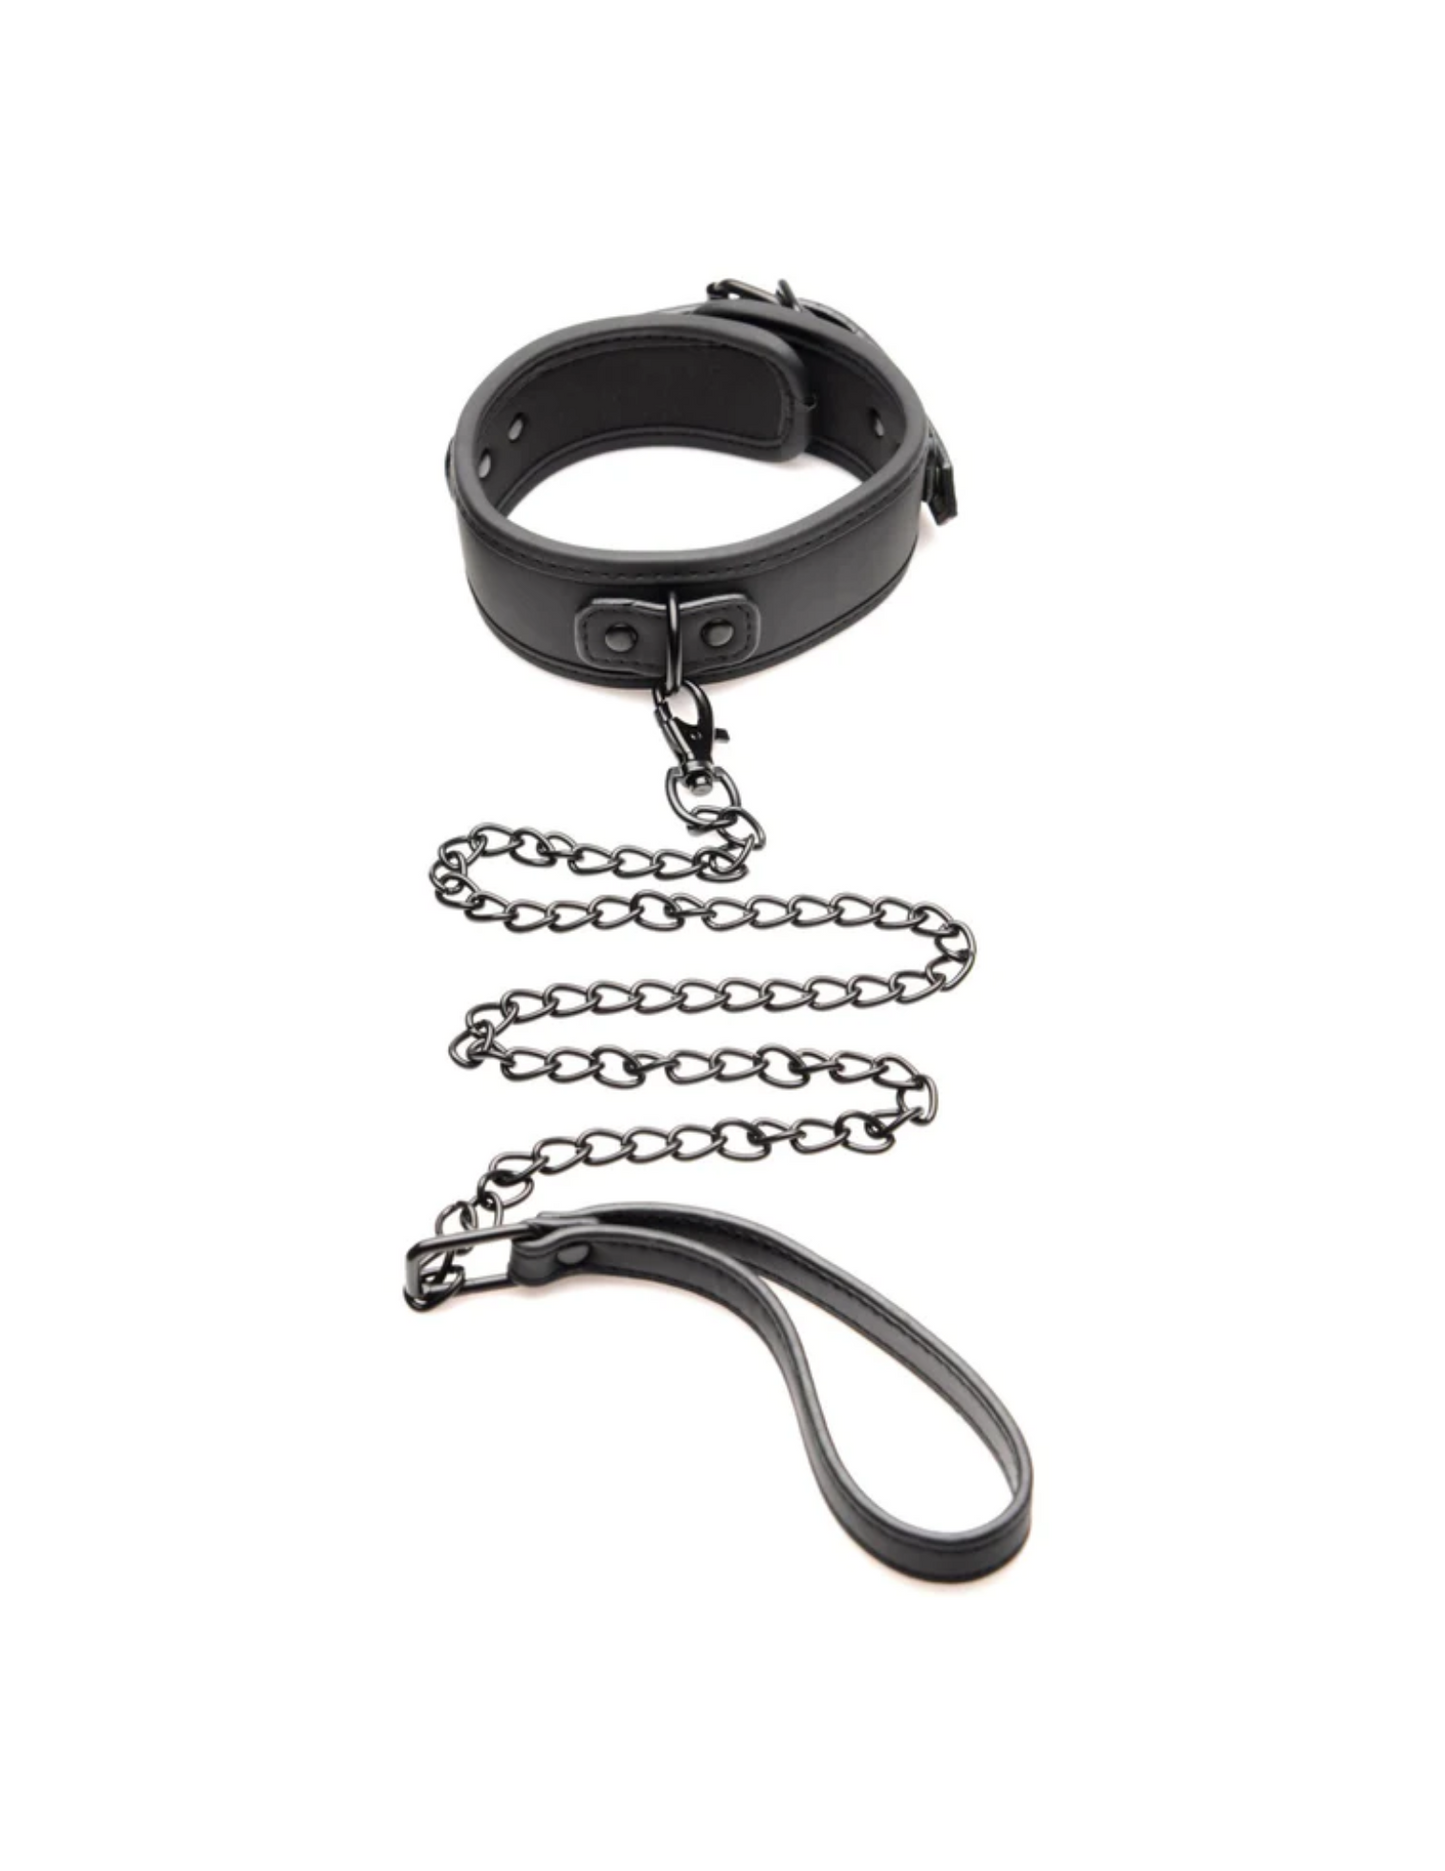 Image features the collar and leash from the Master of Kink PU Leather Deluxe Bondage Set by Master Series and XR Brands.